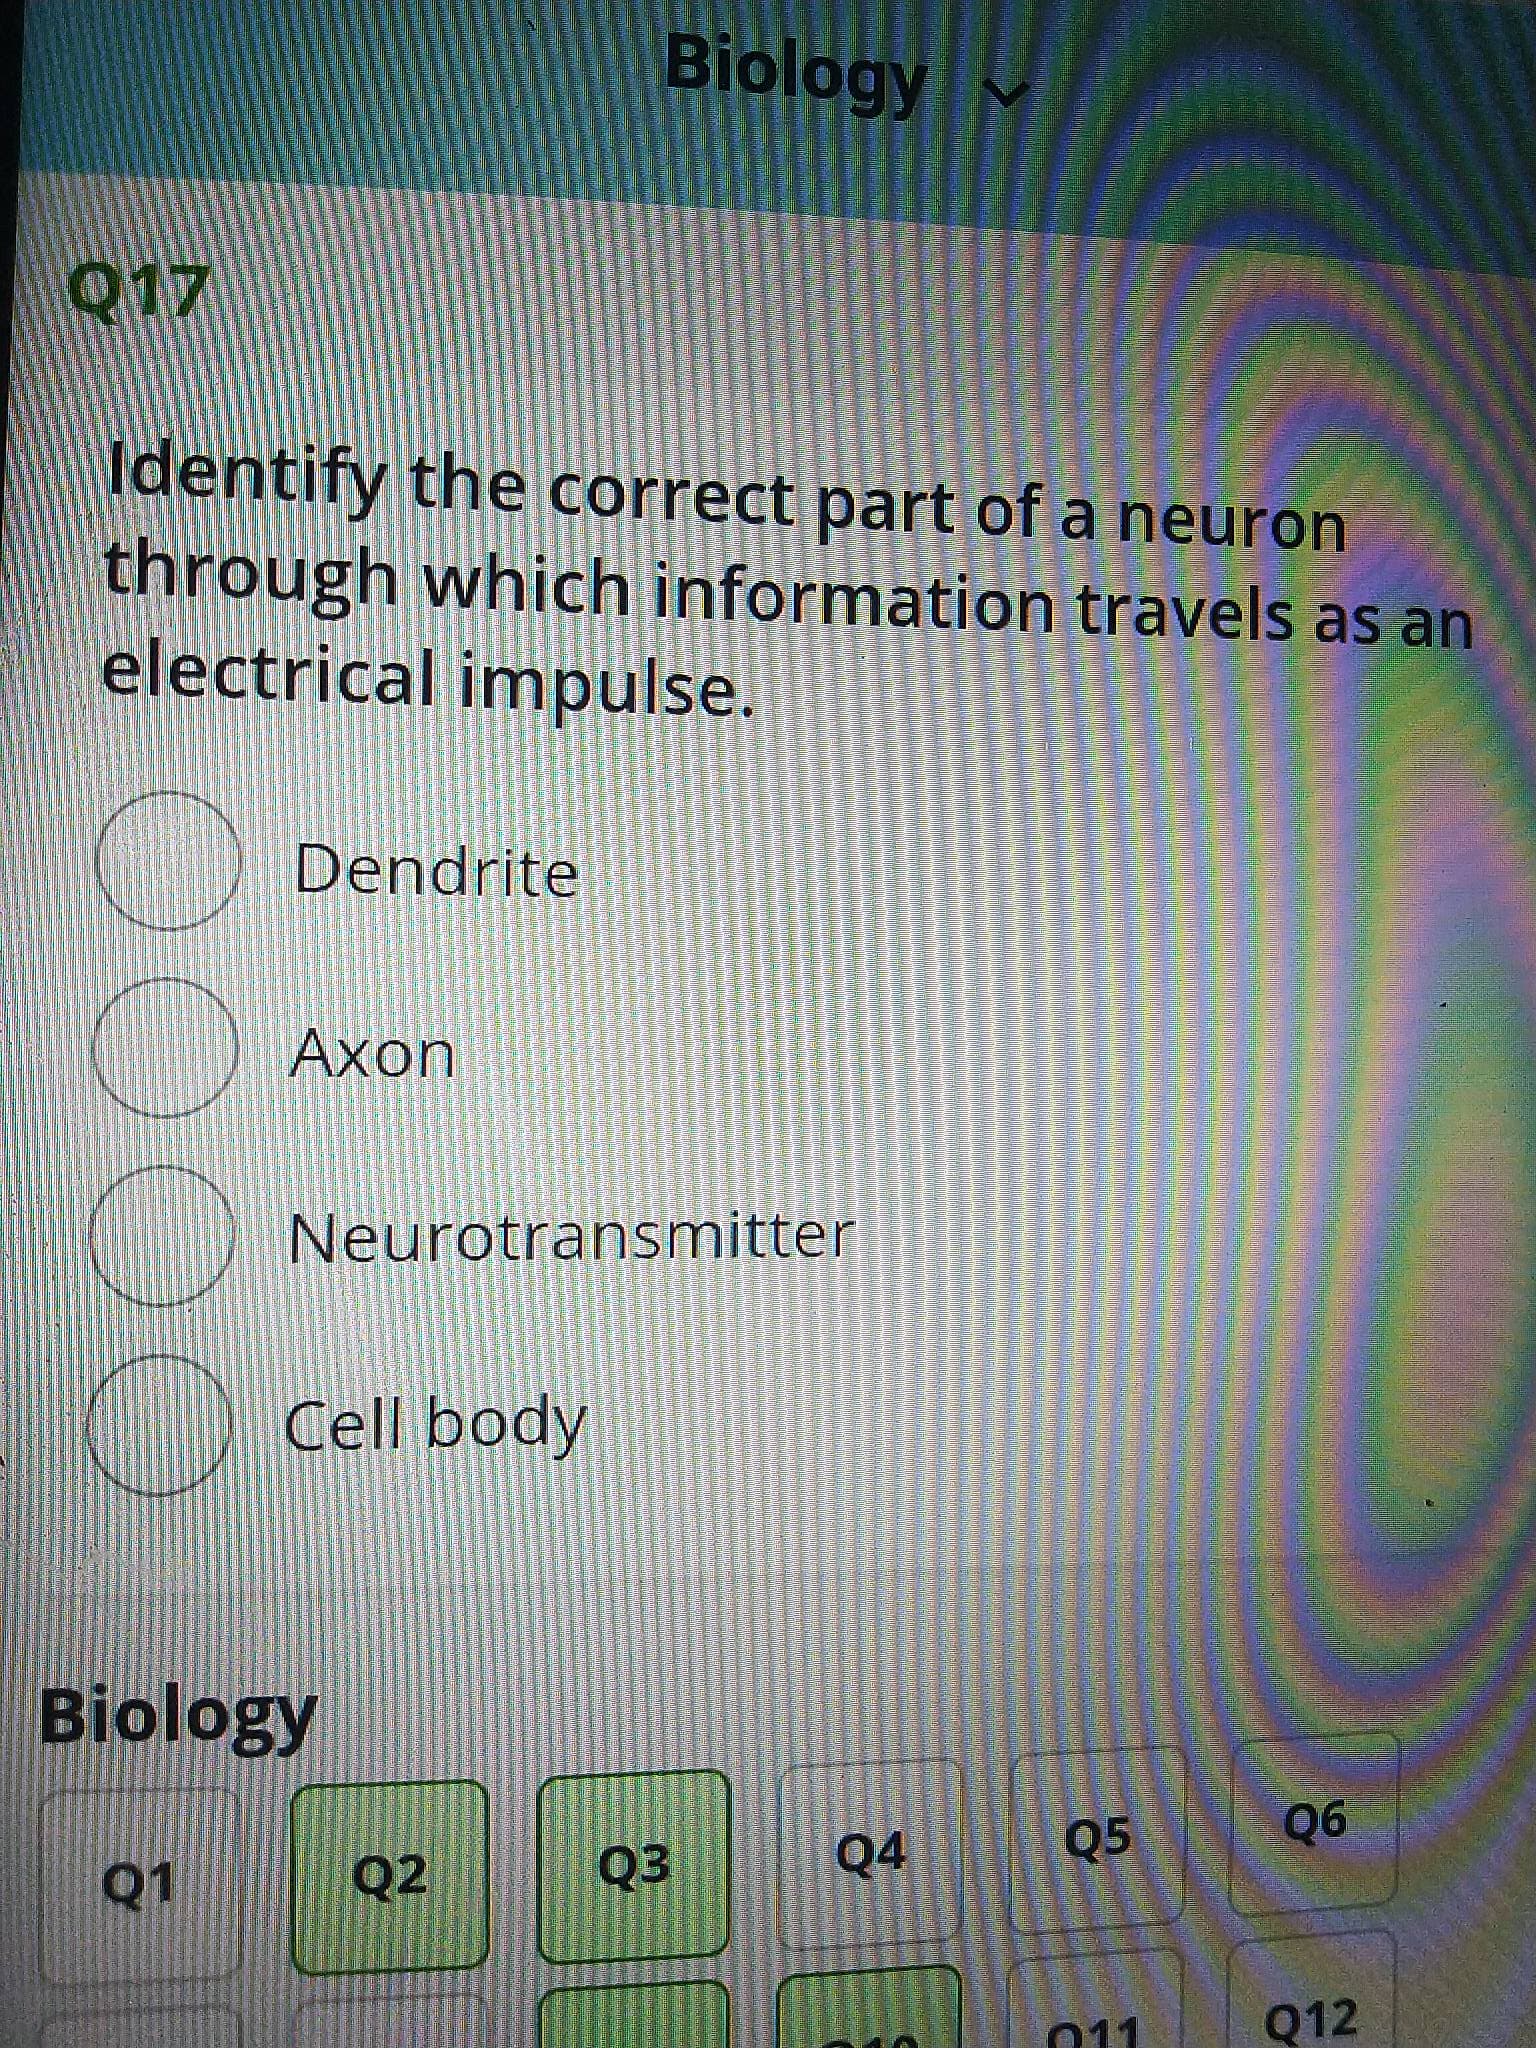 Biolögy
Identify the correct part of a neuron
through which information travels as an
electrical impulse.
Dendrite
Axon
Neurotransmitter
Cell body
Biology
Q4
Q5
90
Q2
011
Q12
